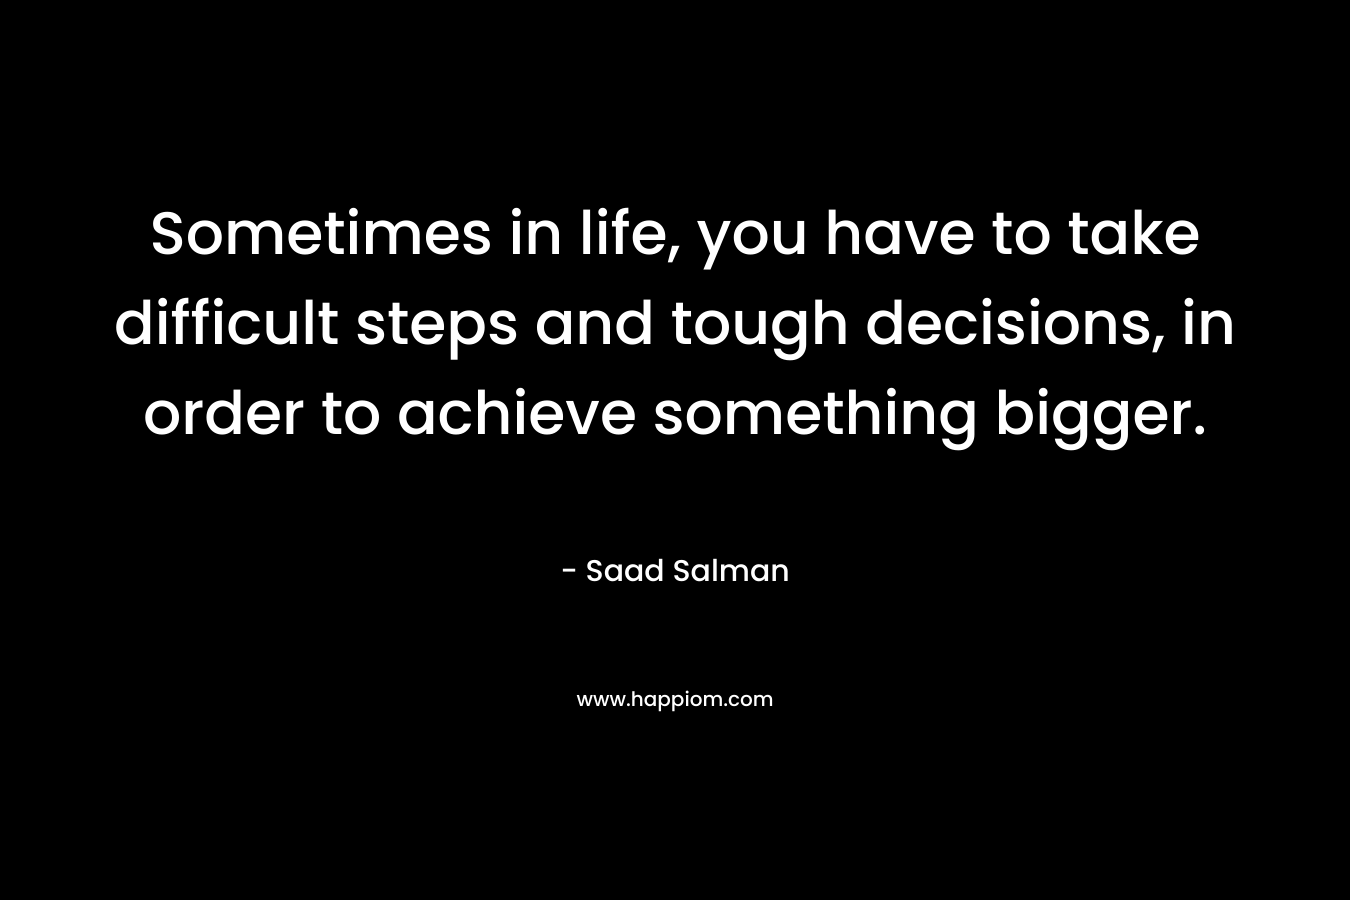 Sometimes in life, you have to take difficult steps and tough decisions, in order to achieve something bigger.